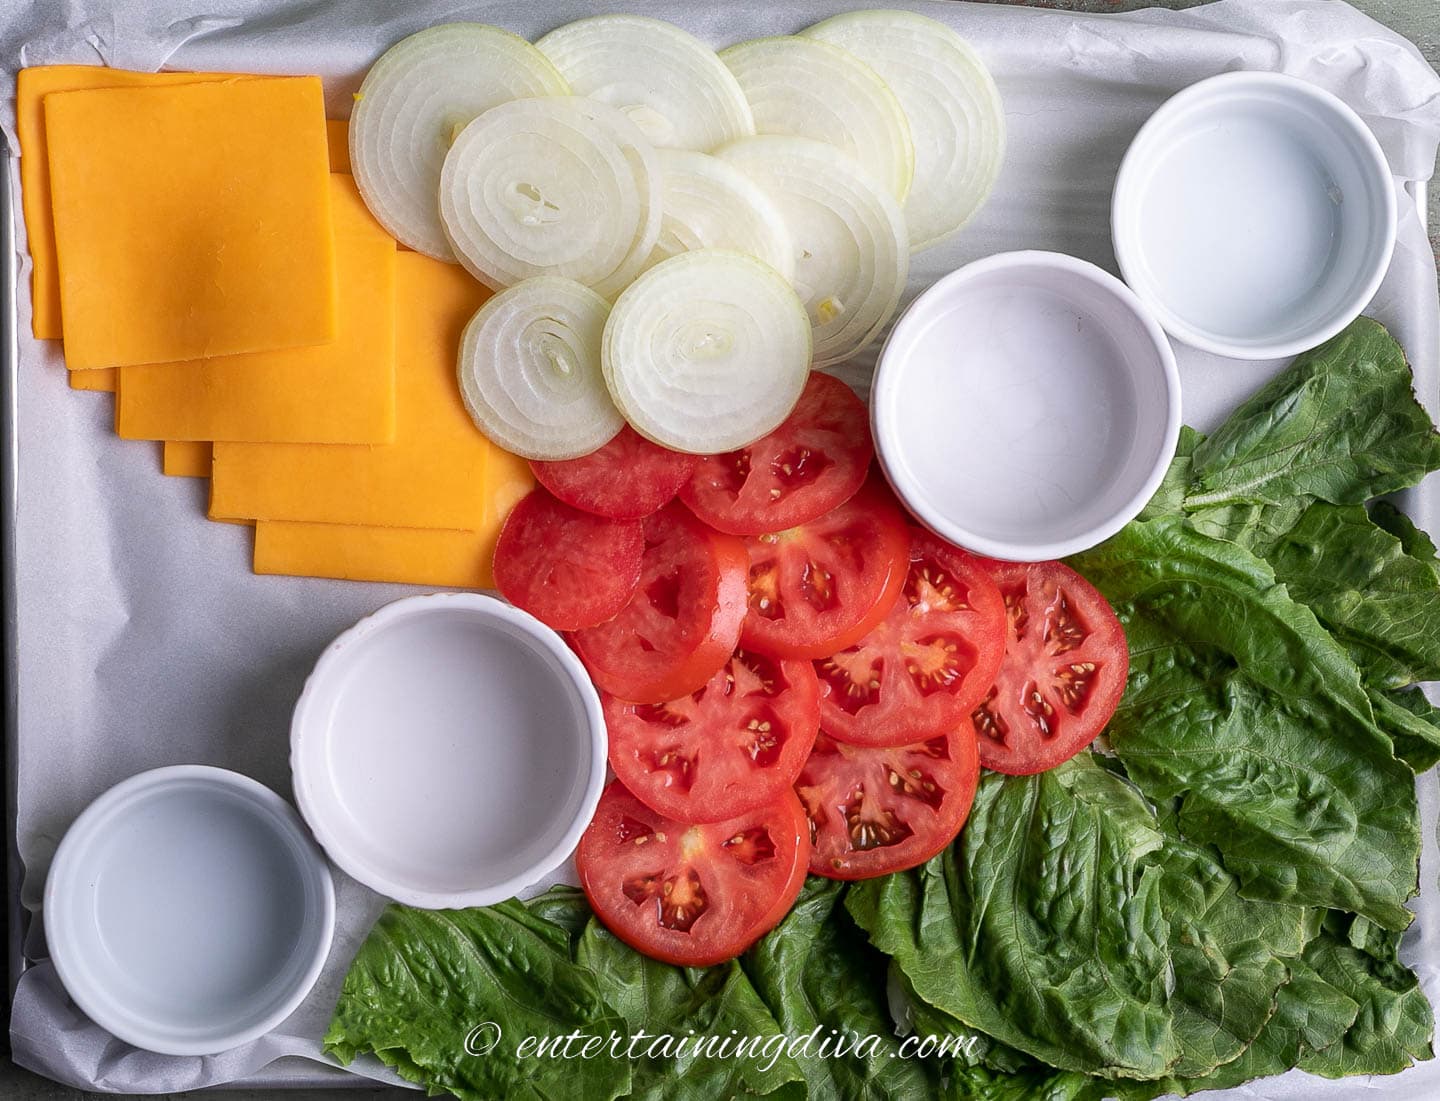 how to make a burger board step 5: bowls, lettuce, cheese, tomatoes and onions